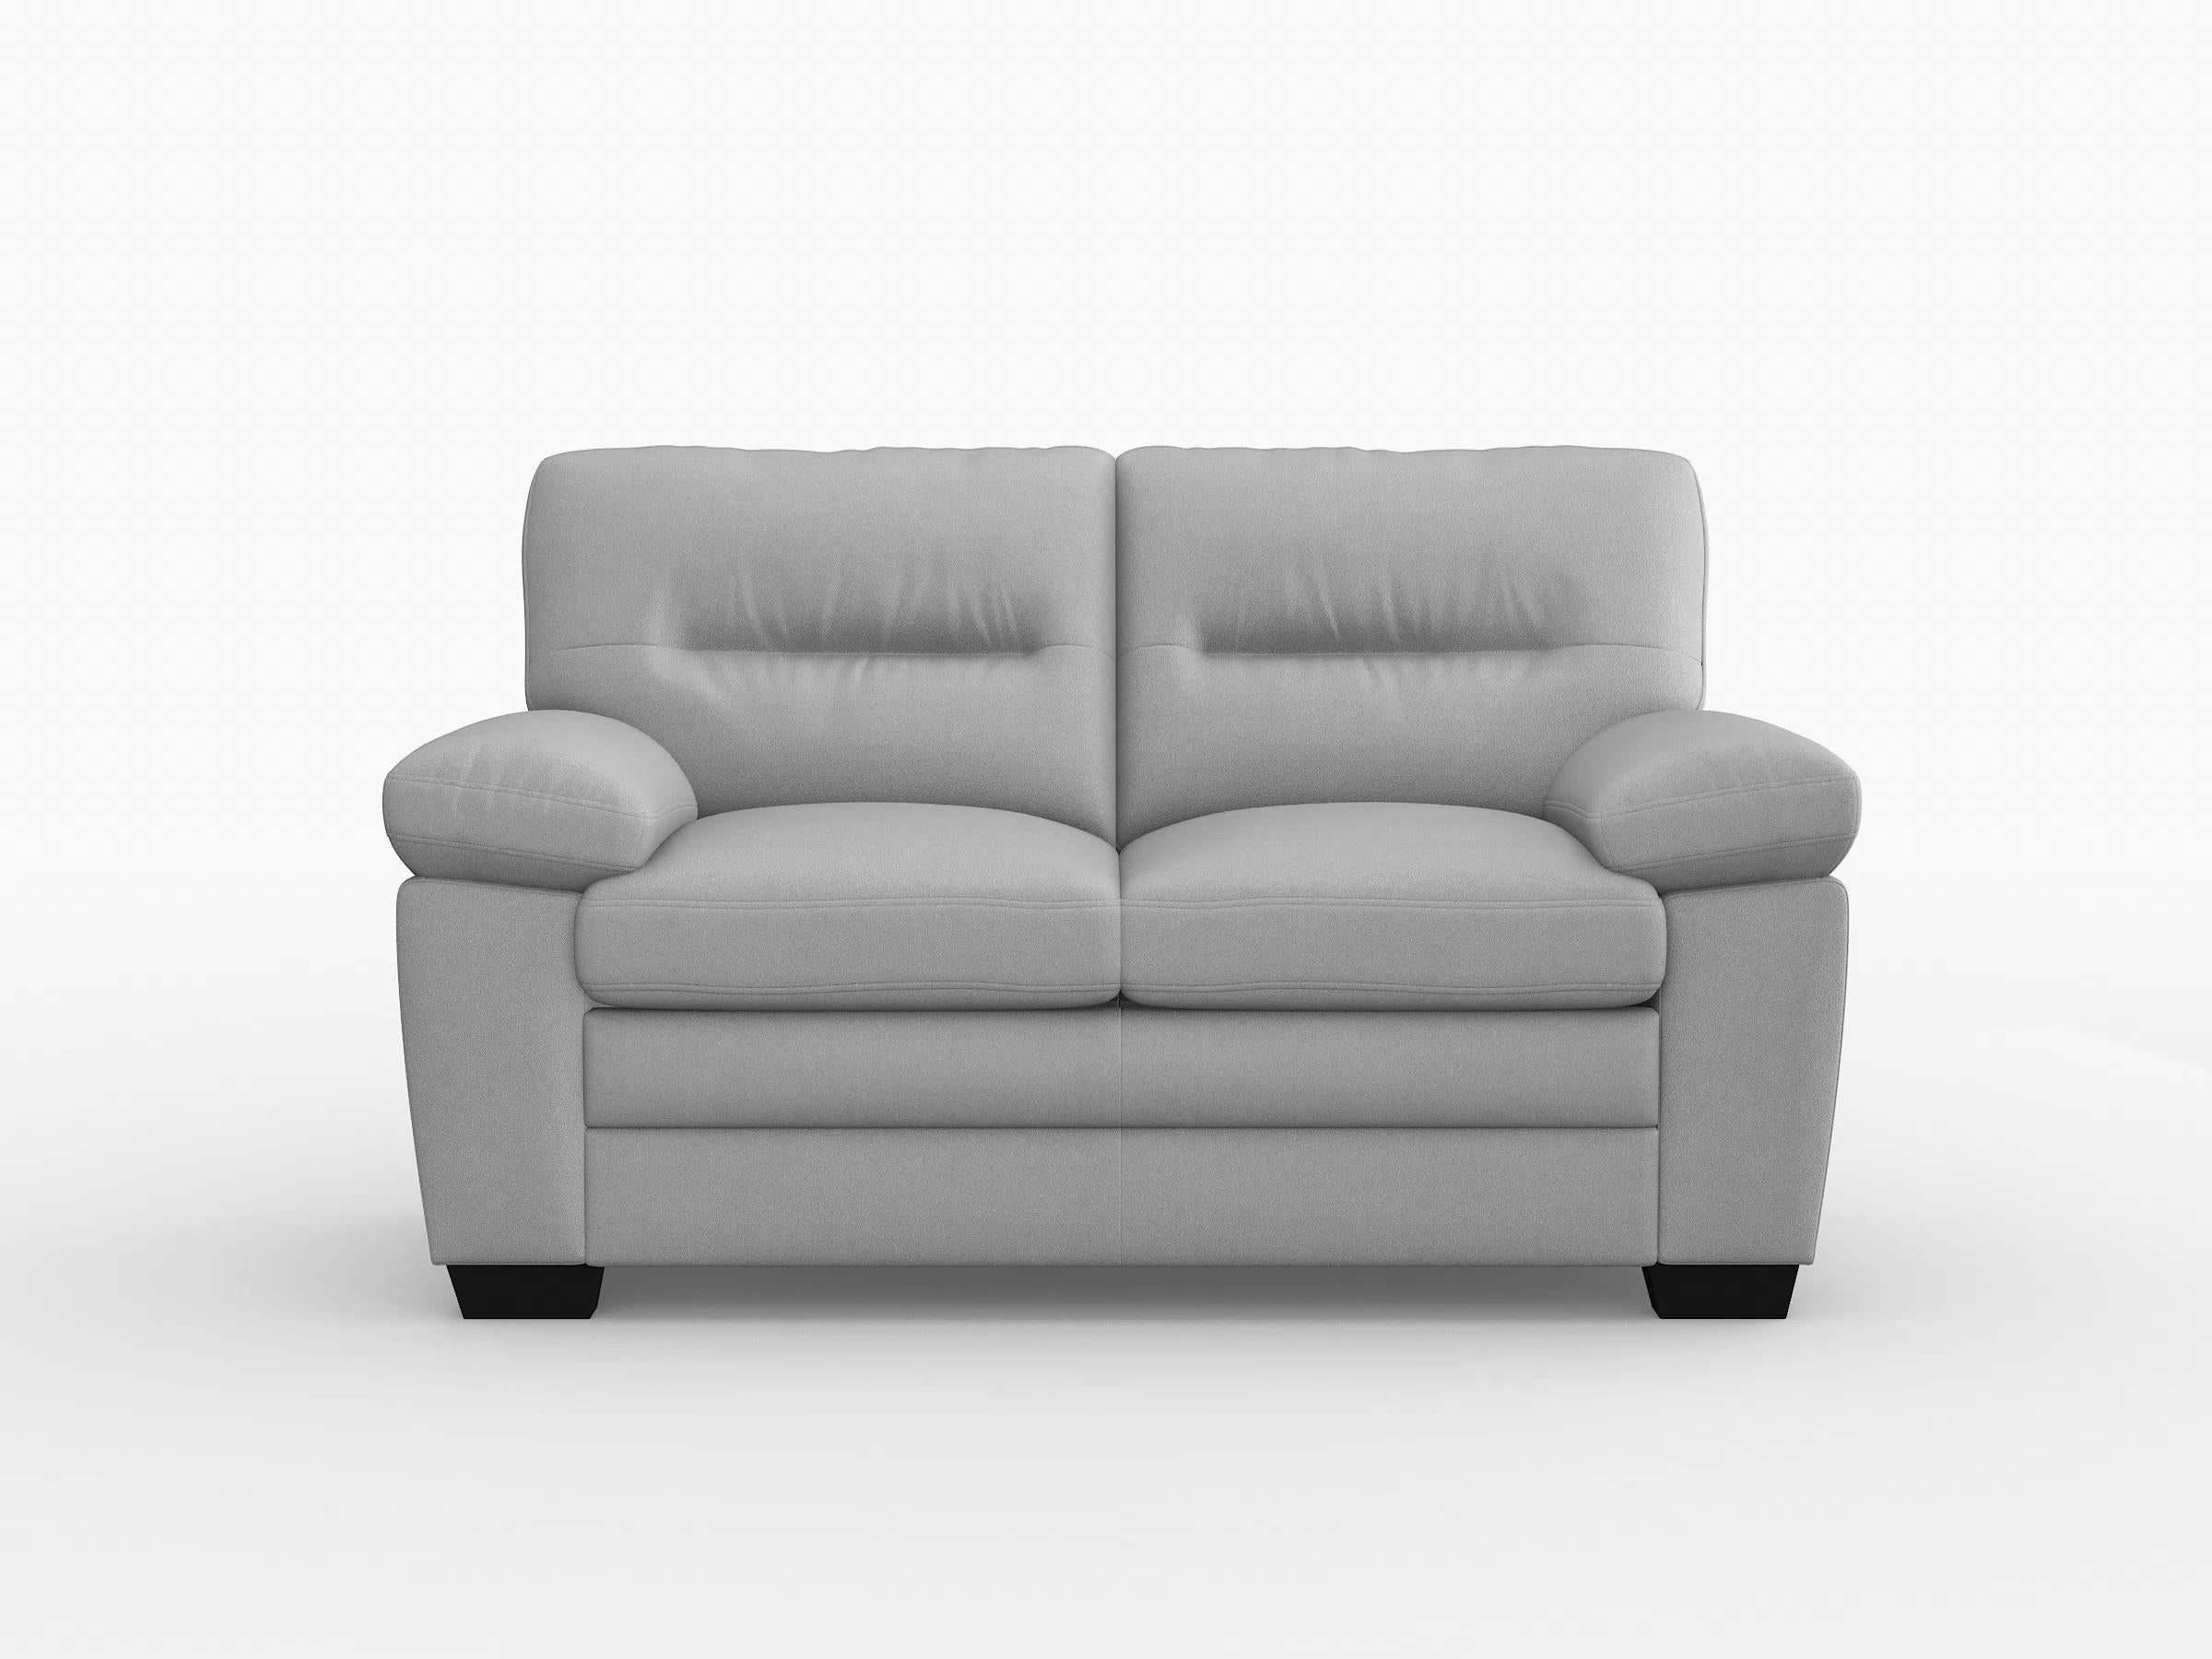 Keighly Gray Loveseat - 9328GY-2 - Bien Home Furniture &amp; Electronics